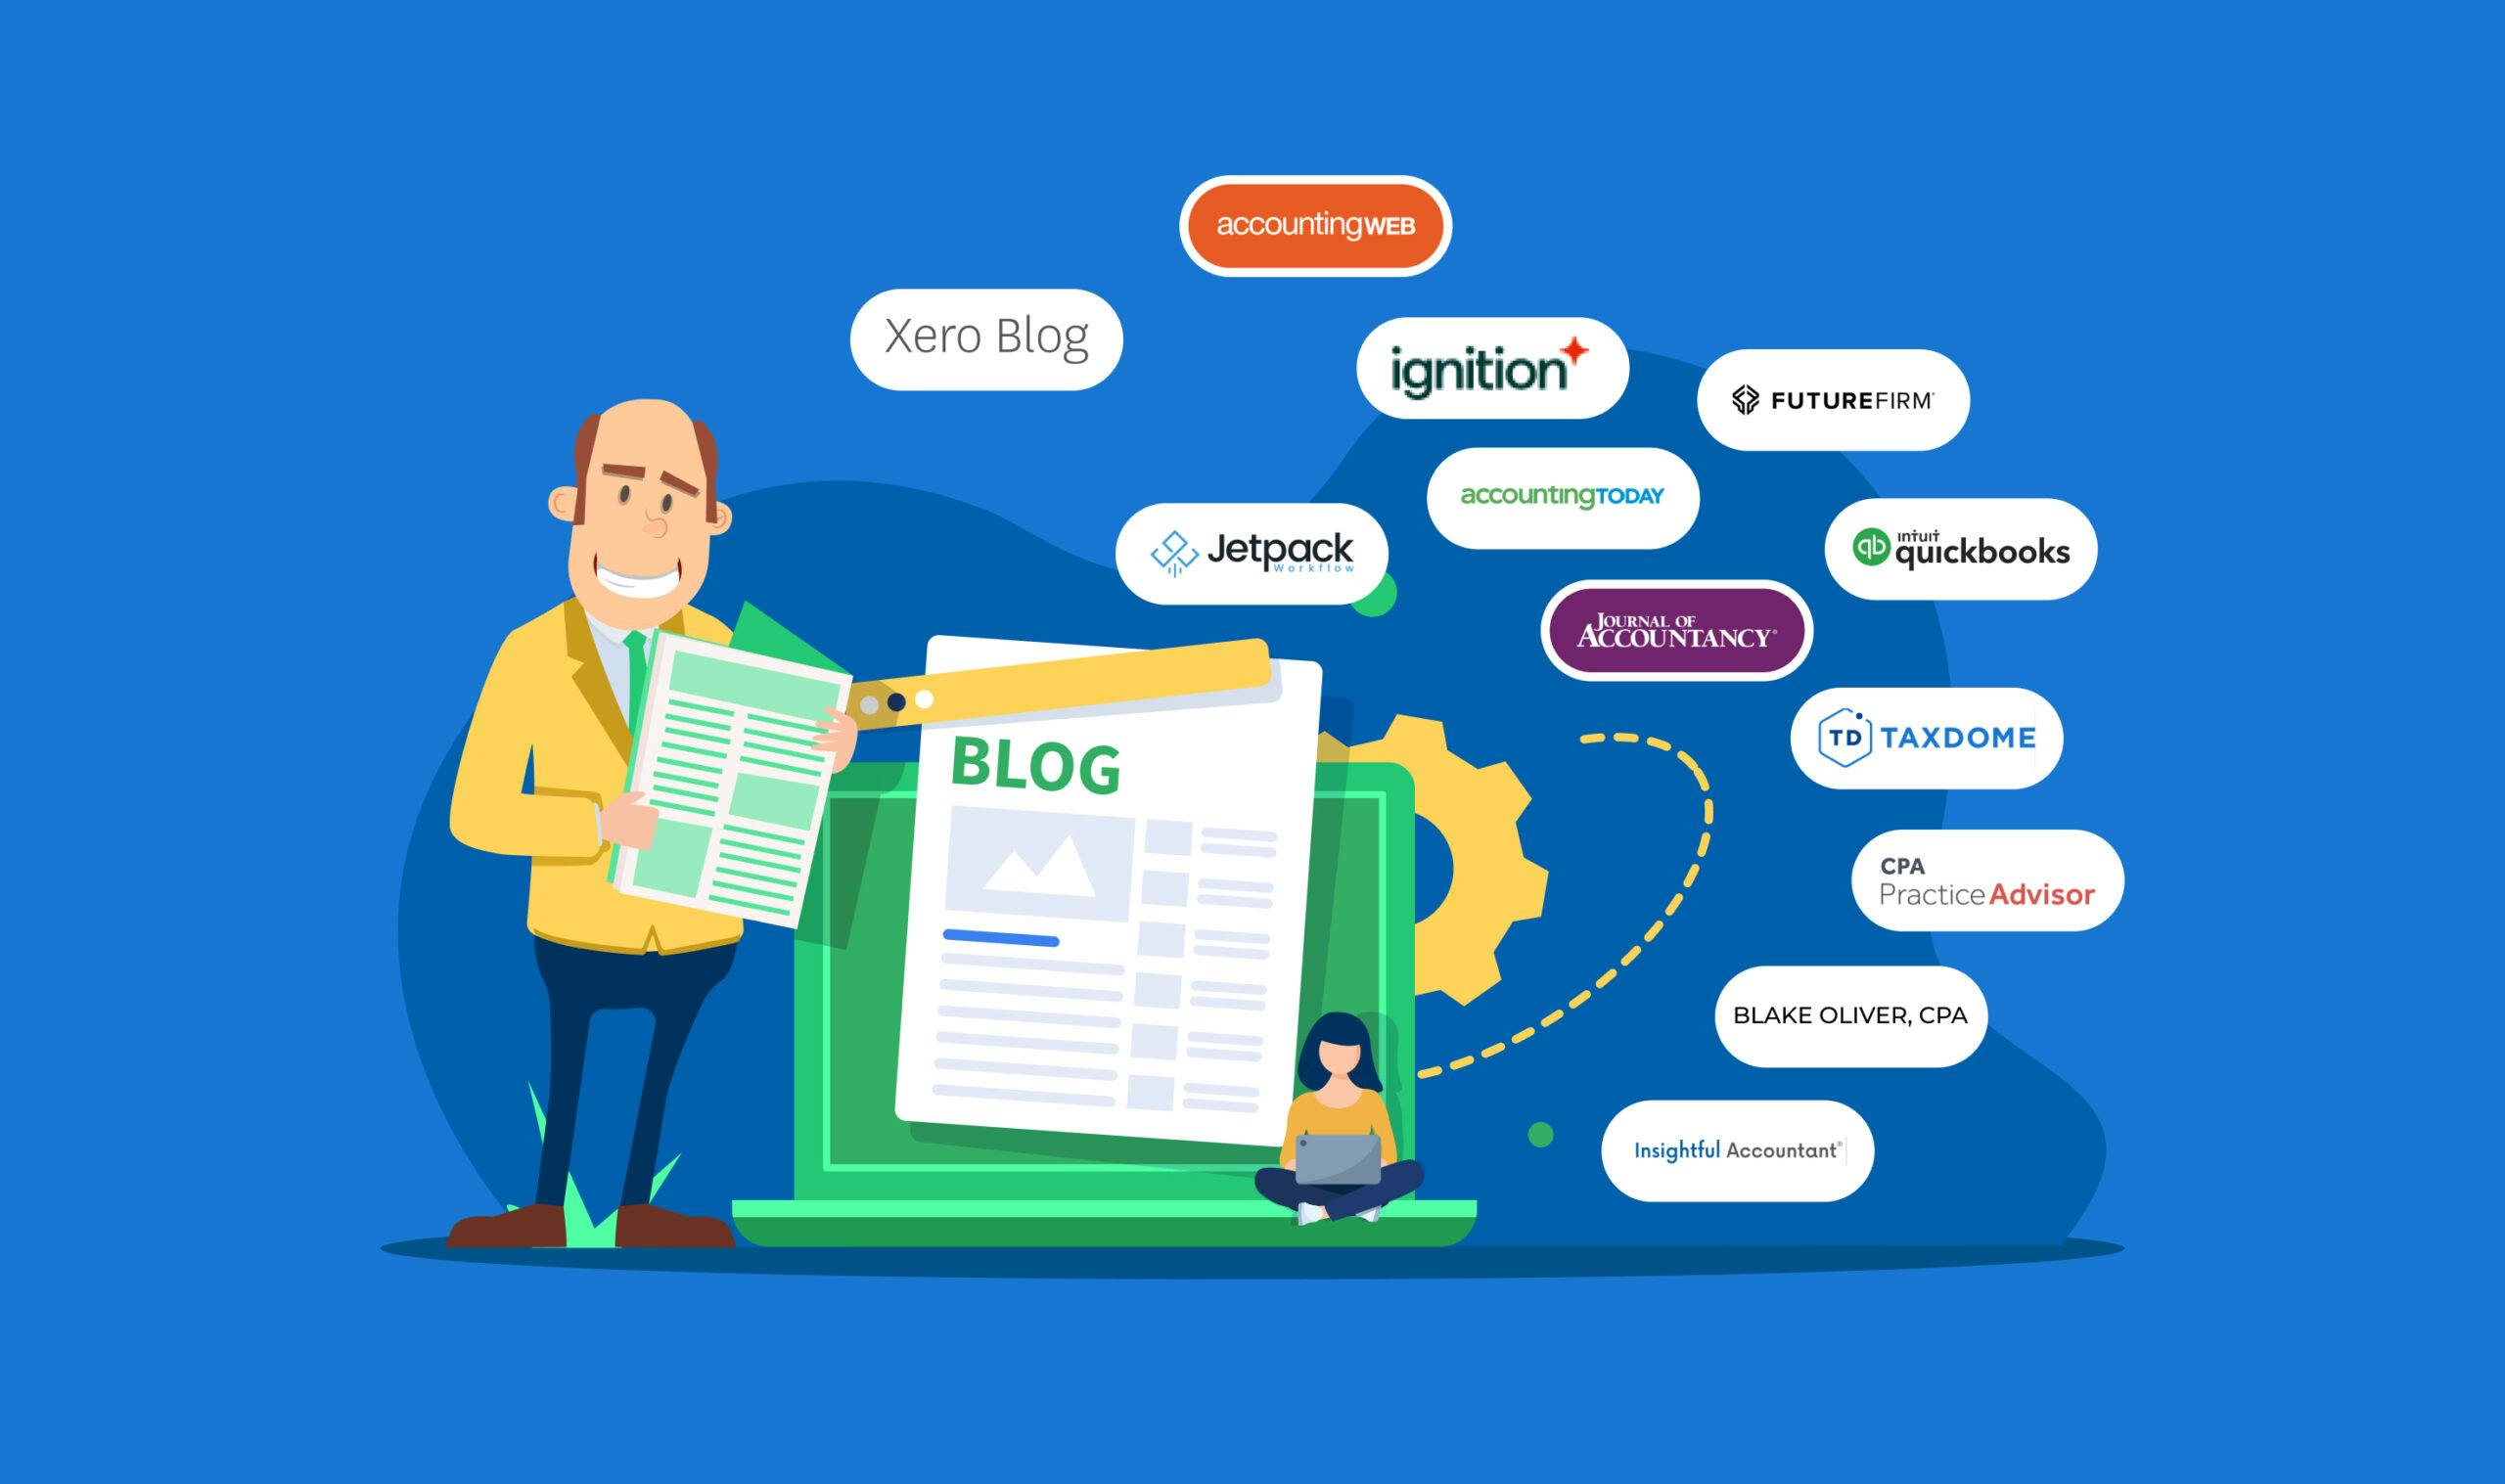 Top accounting blogs